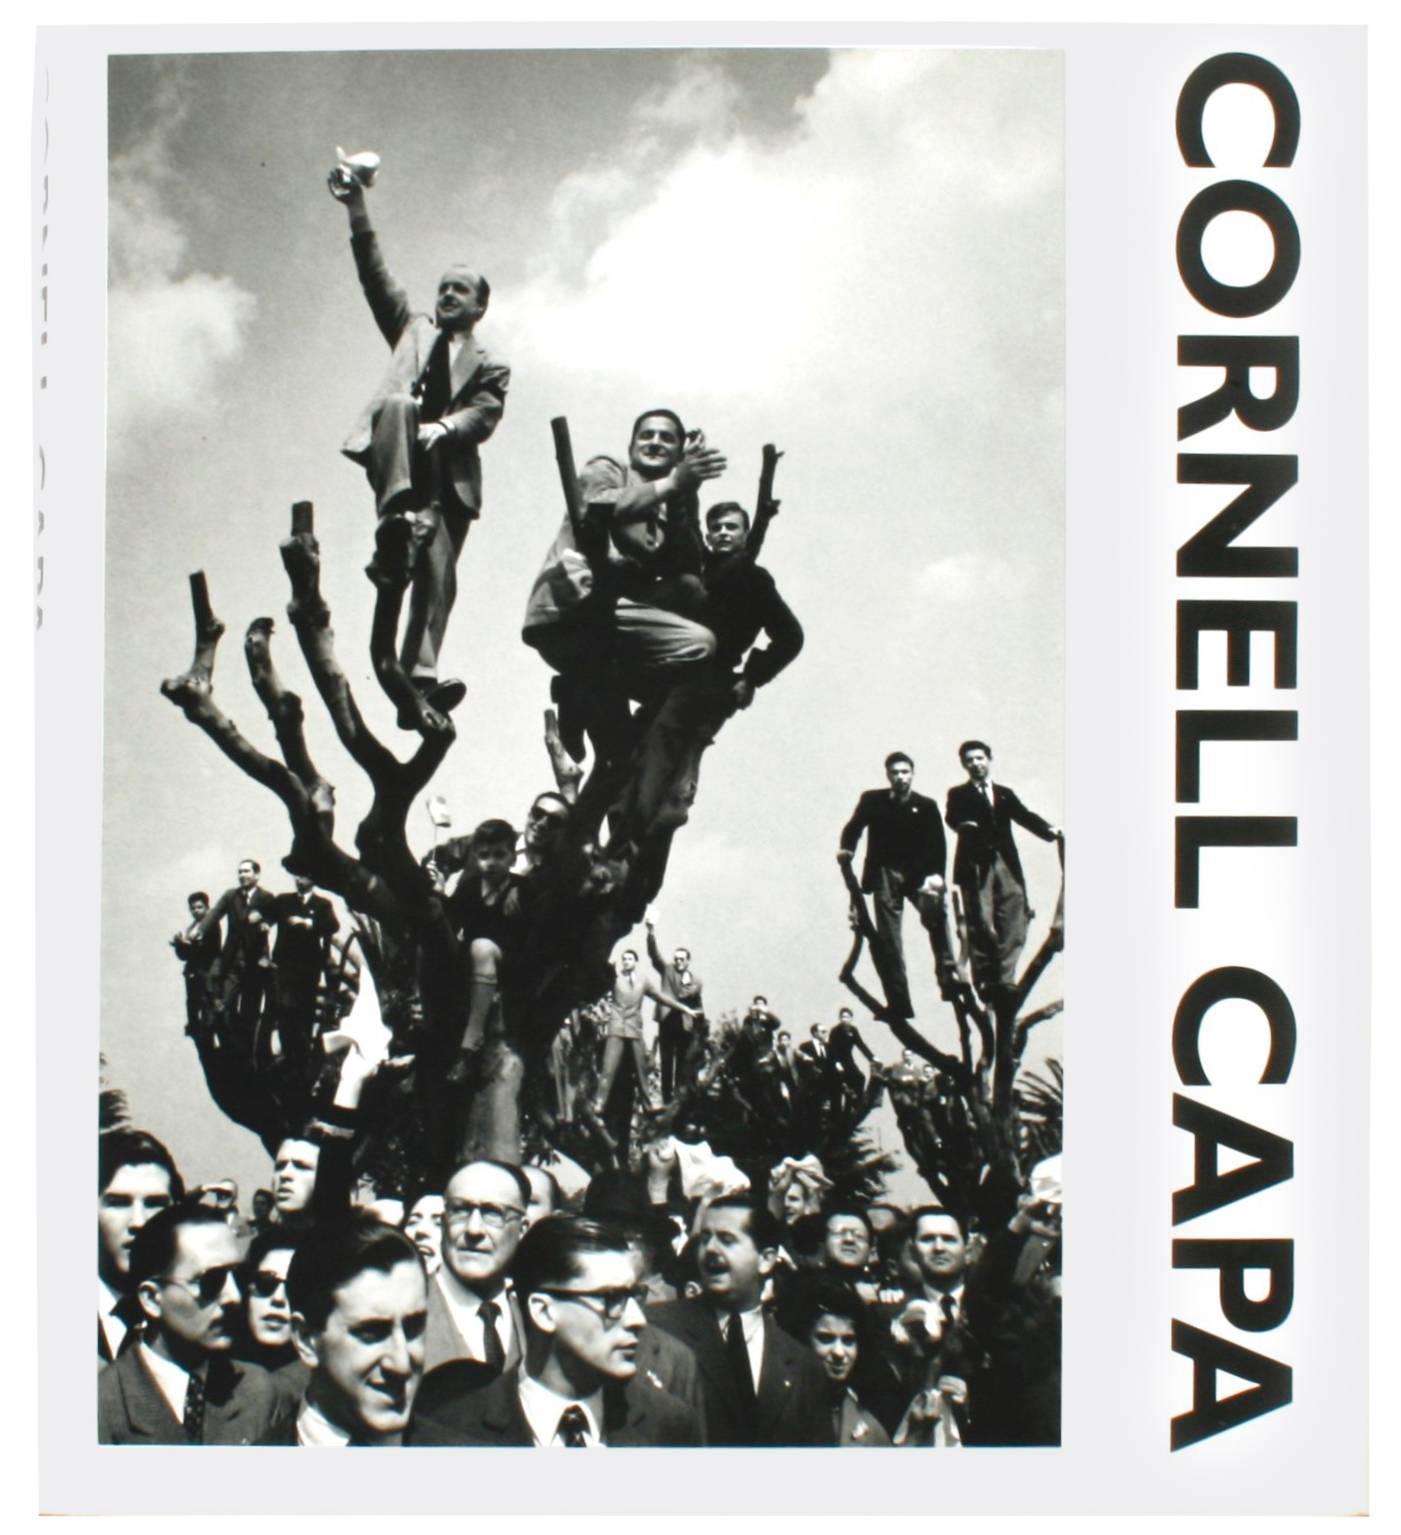 Cornell Capa: Photographs, Signed First Edition by Cornell Capa